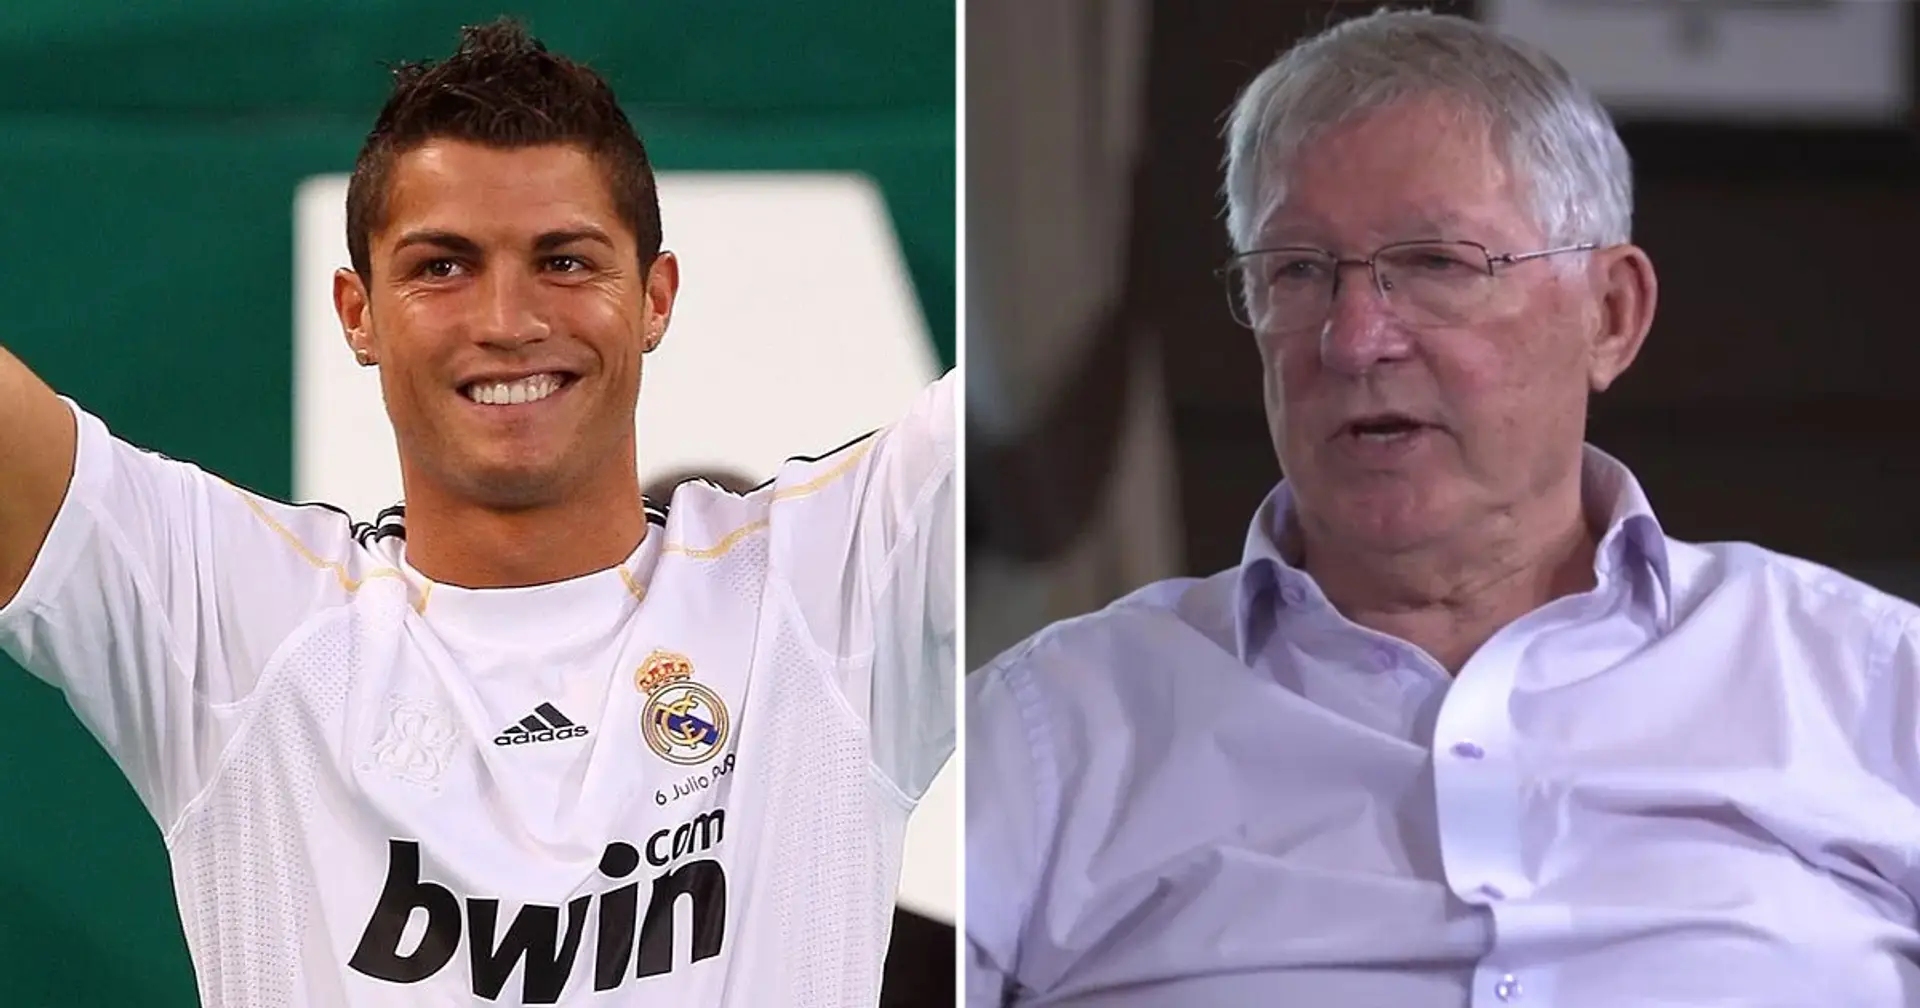 'He had a dream': Sir Alex Ferguson looks back at Ronaldo's move to Real Madrid in 2009